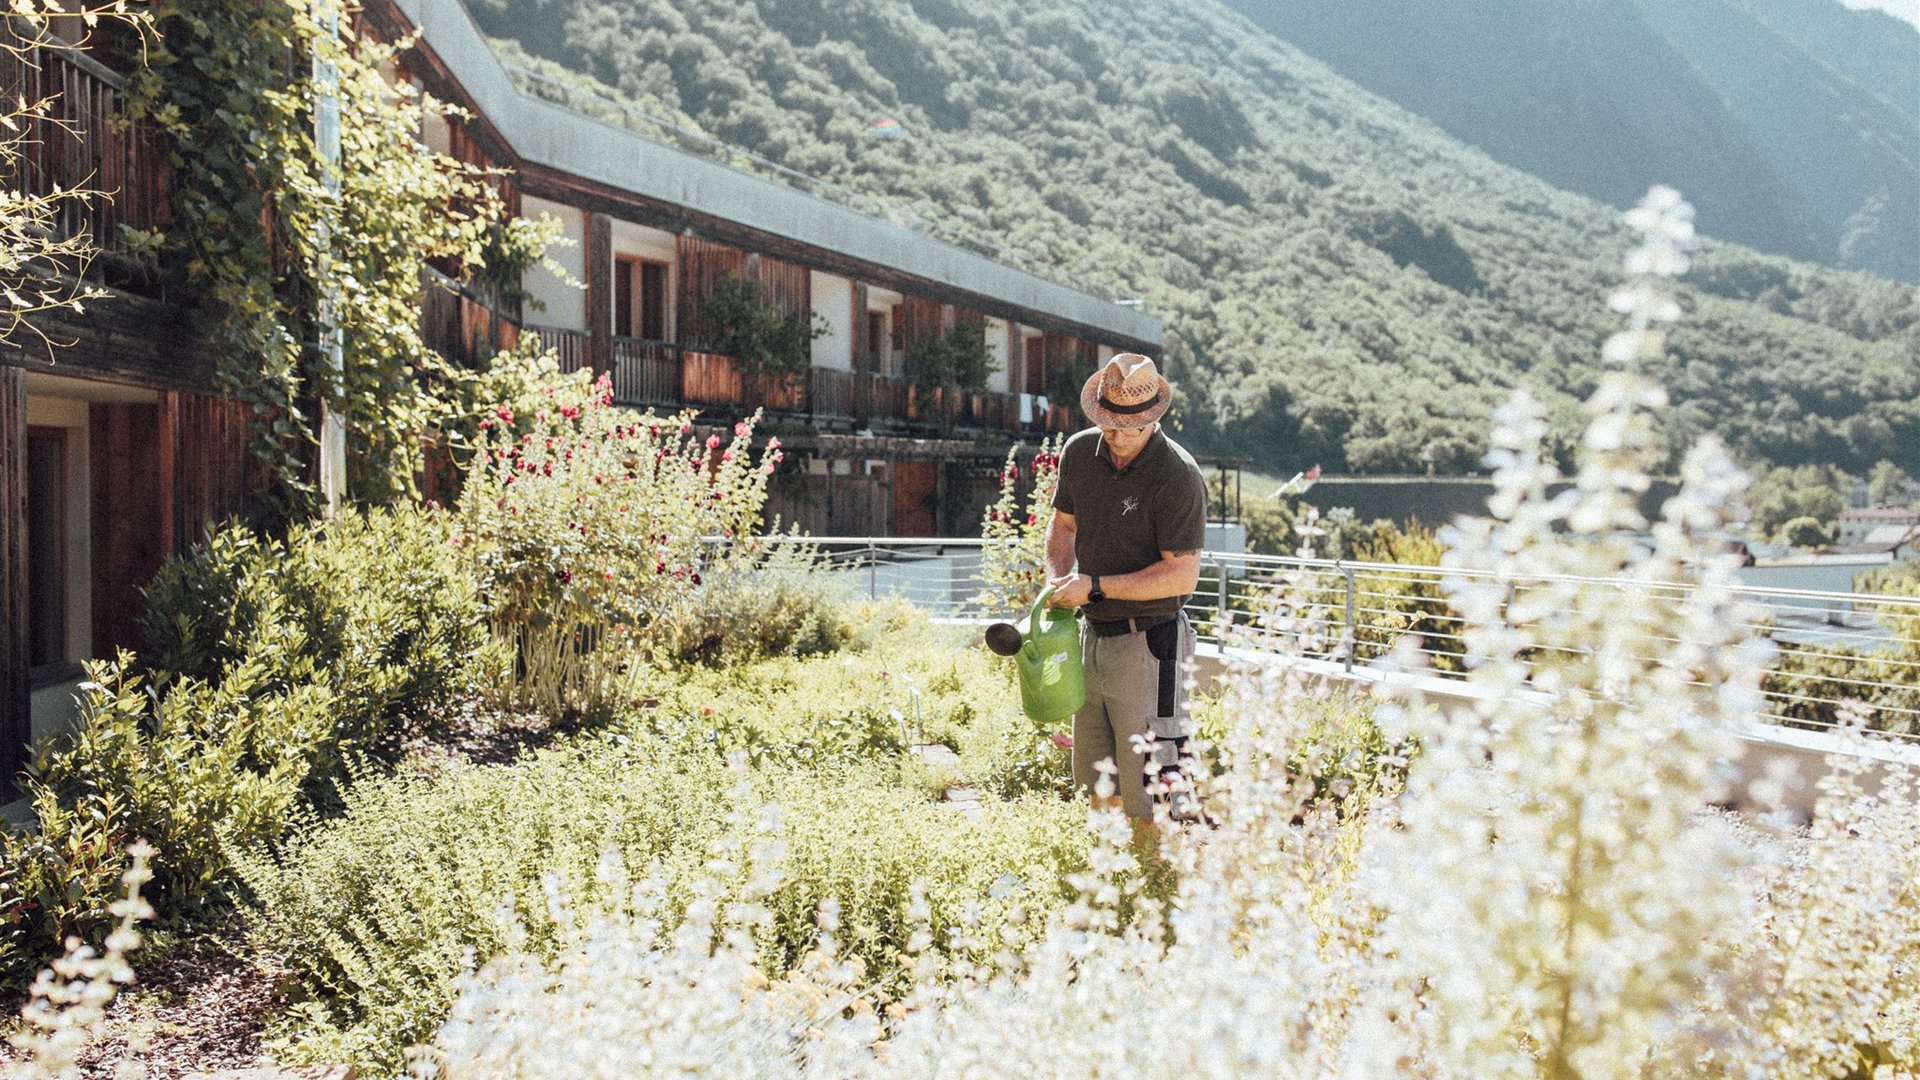 Your organic hotel in South Tyrol